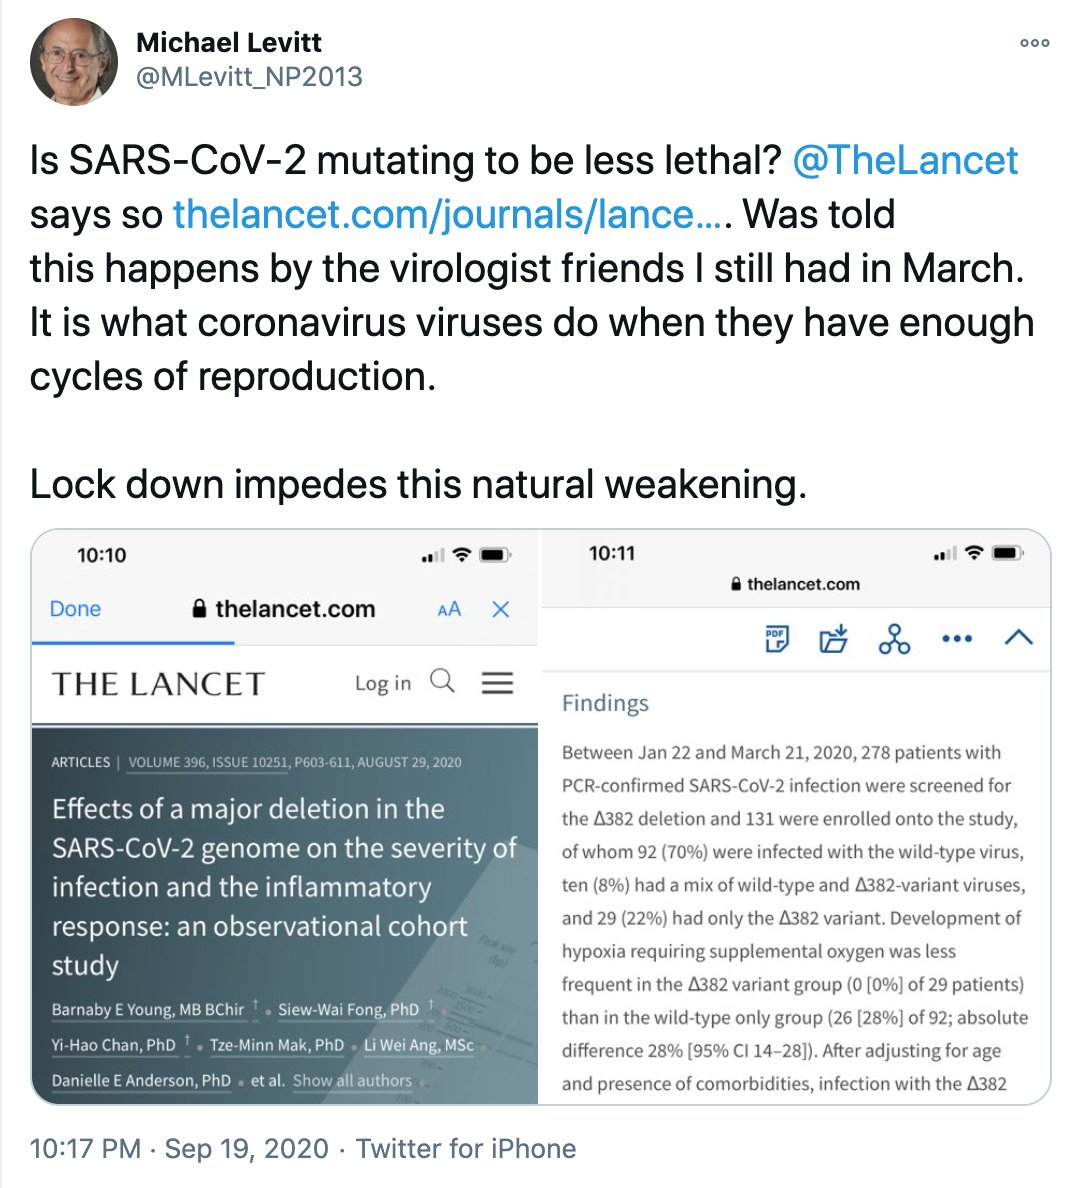 On Sept 19, Levitt suggested that if we had allowed the coronavirus to spread freely, its lethality could have been reduced.He was clearly spewing disinformation, leading to additional avoidable infections and deaths. https://twitter.com/SafaMote/status/1307804598707646464?s=205/